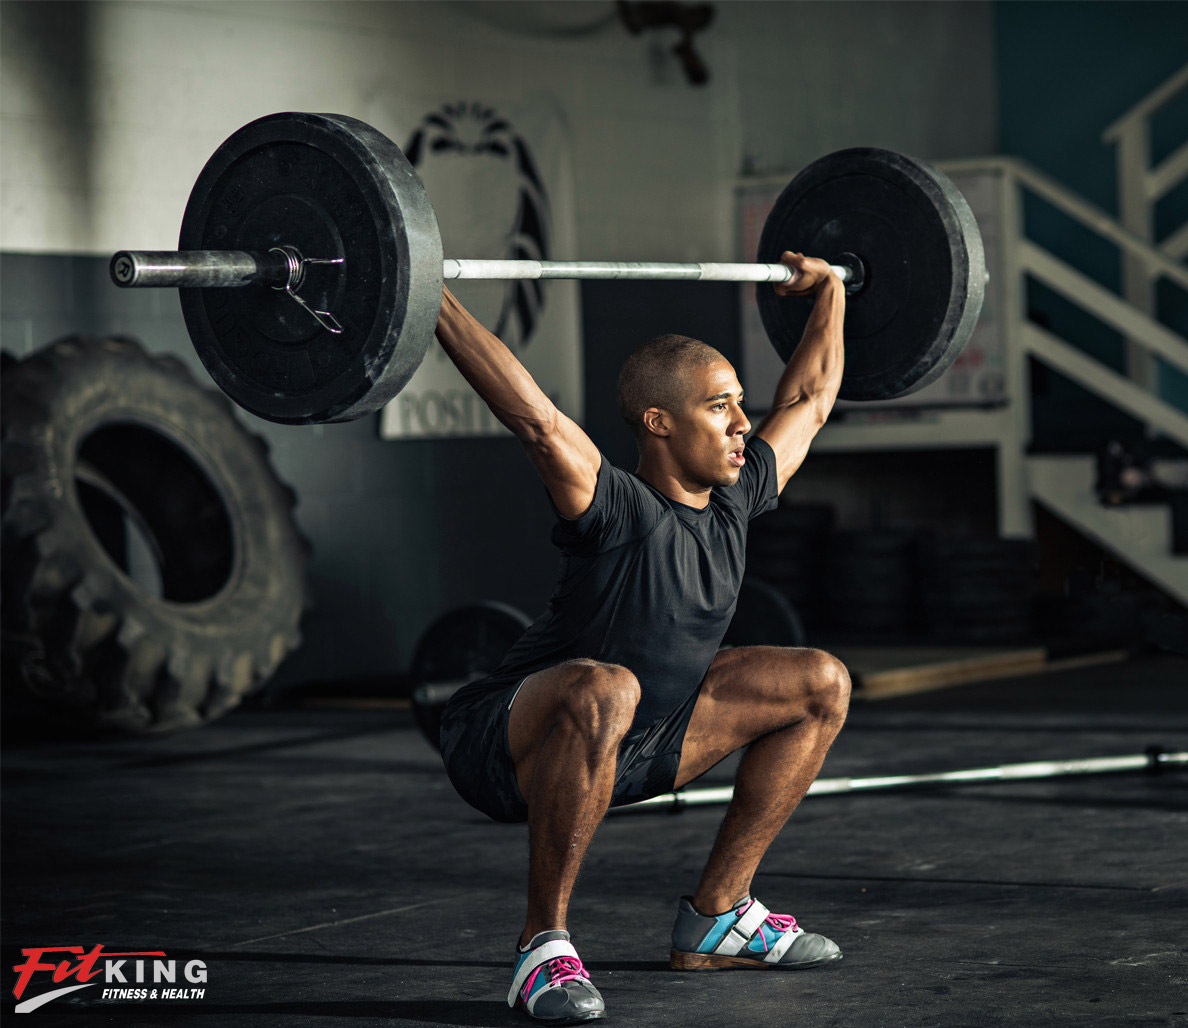 Do You really want Weightlifting shoes?